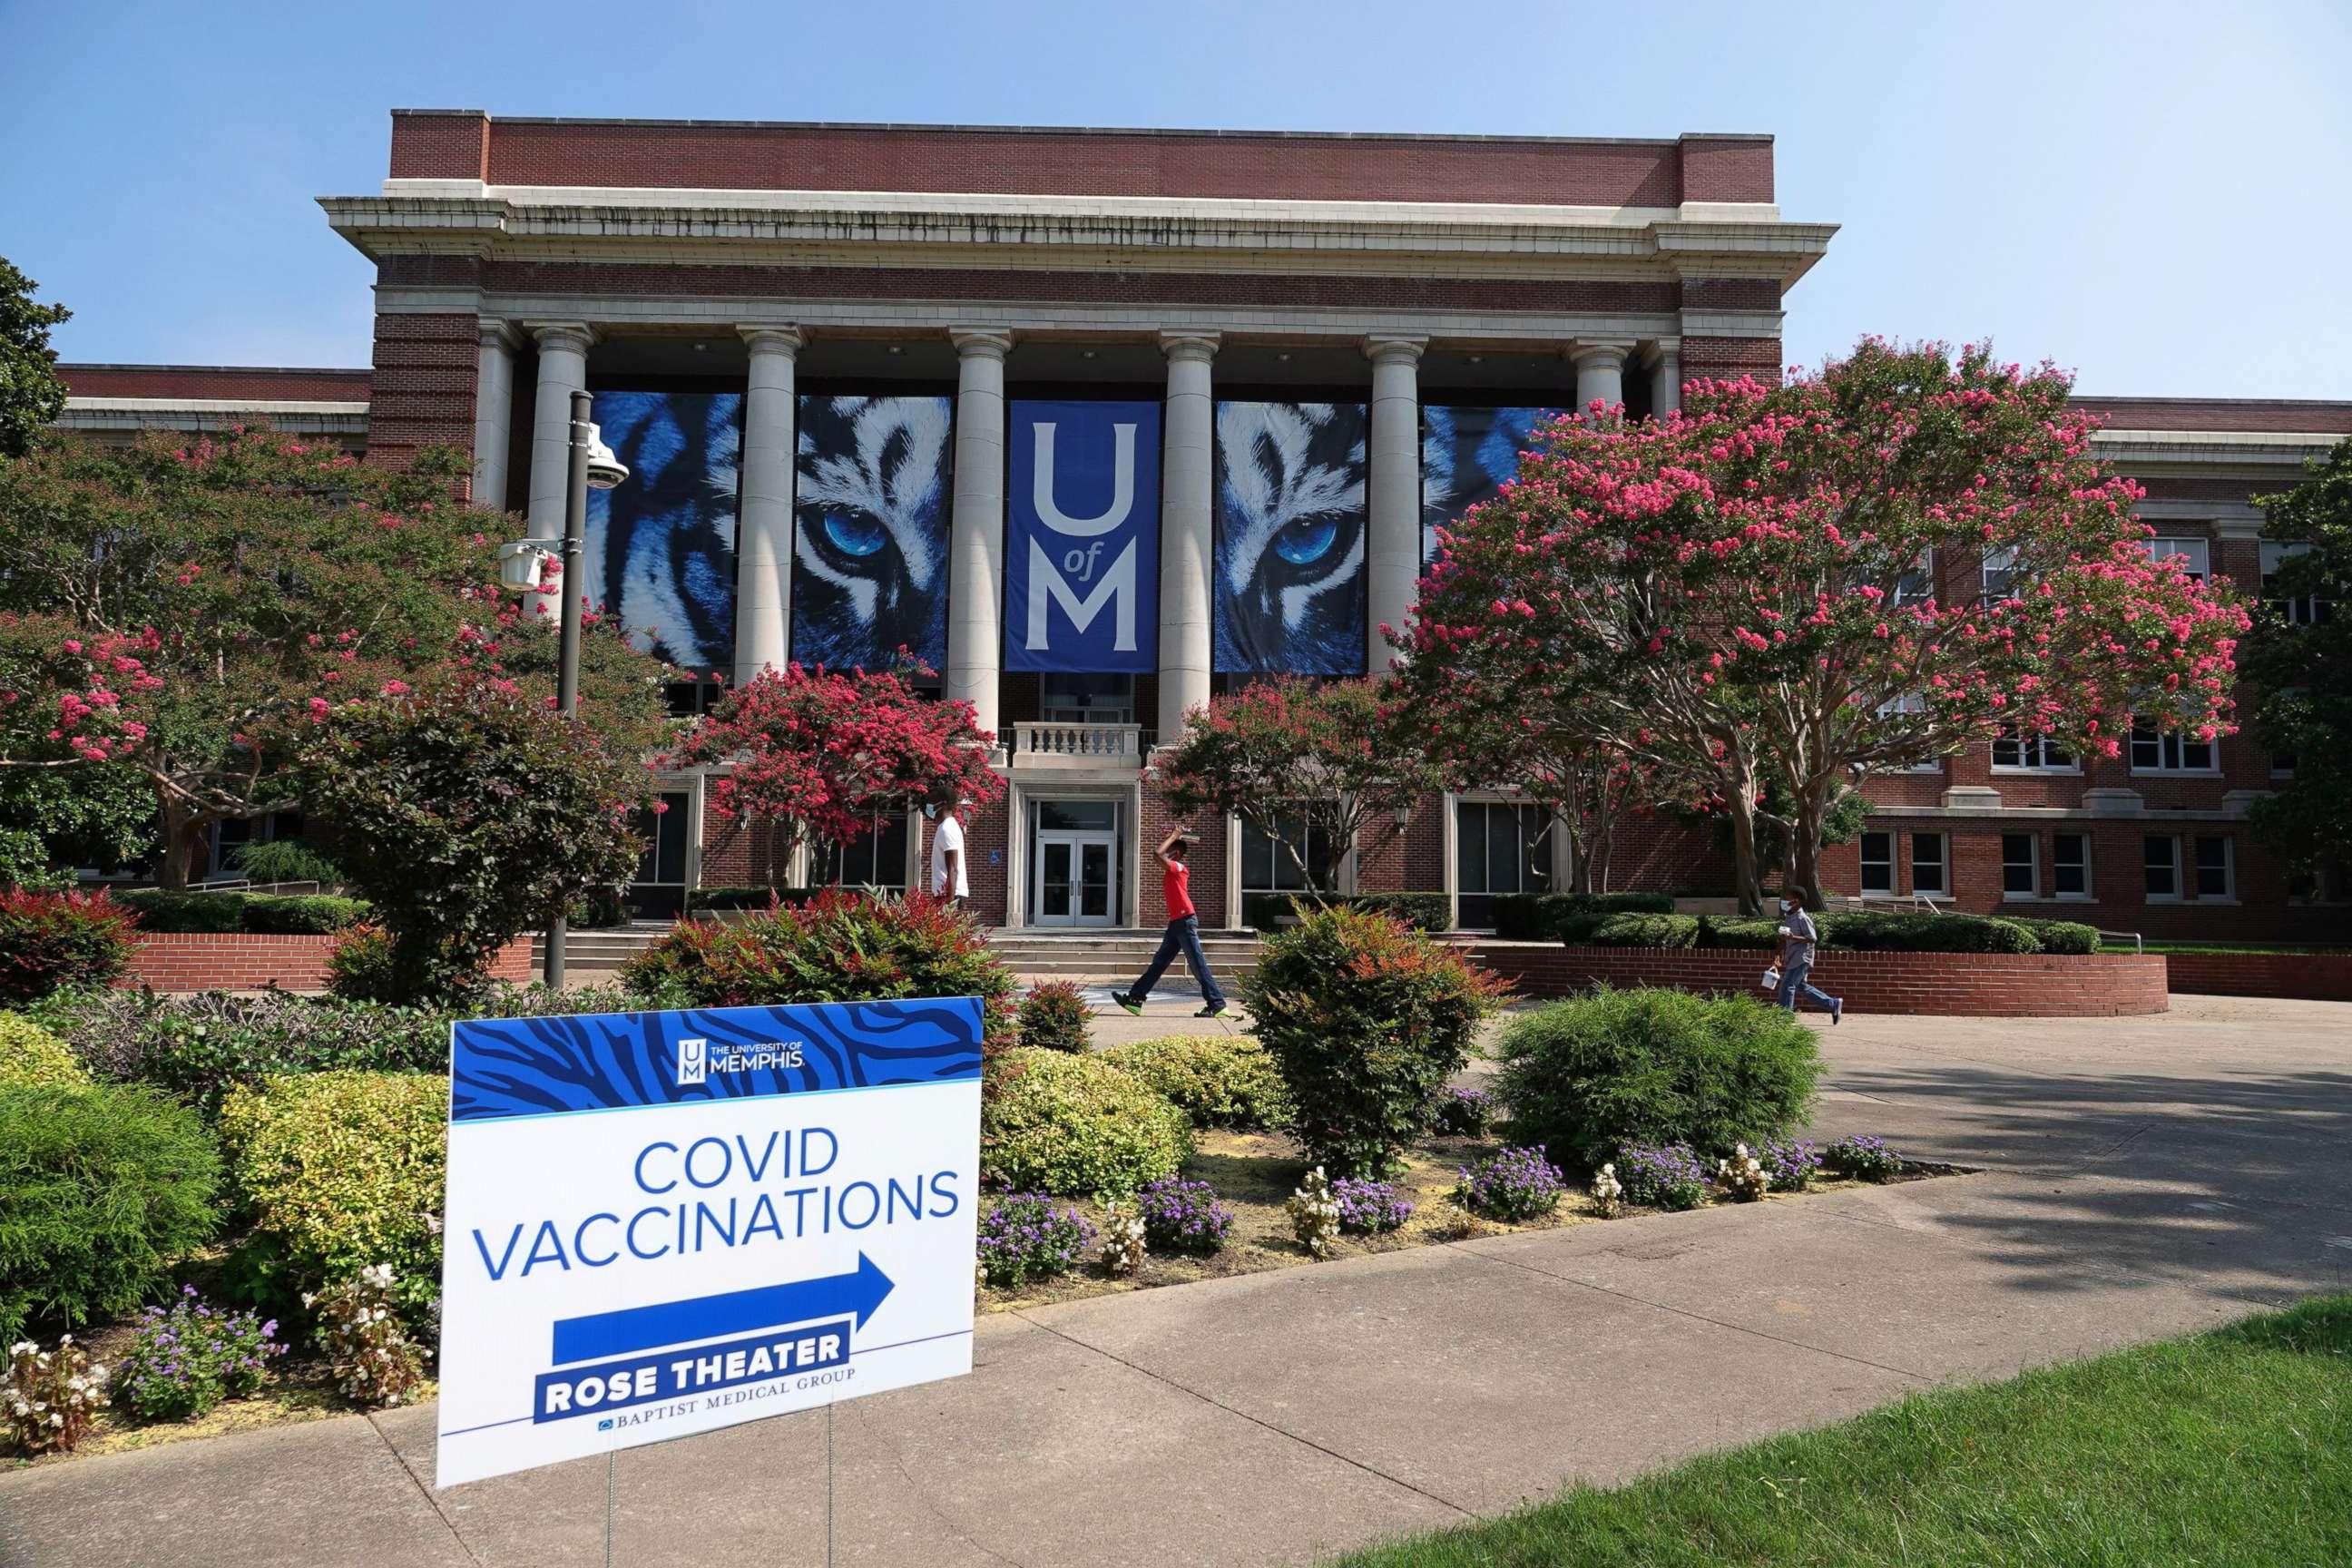 PHOTO: A sign for COVID-19 vaccinations sits on the campus of the University of Memphis in Memphis, Tenn., July 22, 2021.